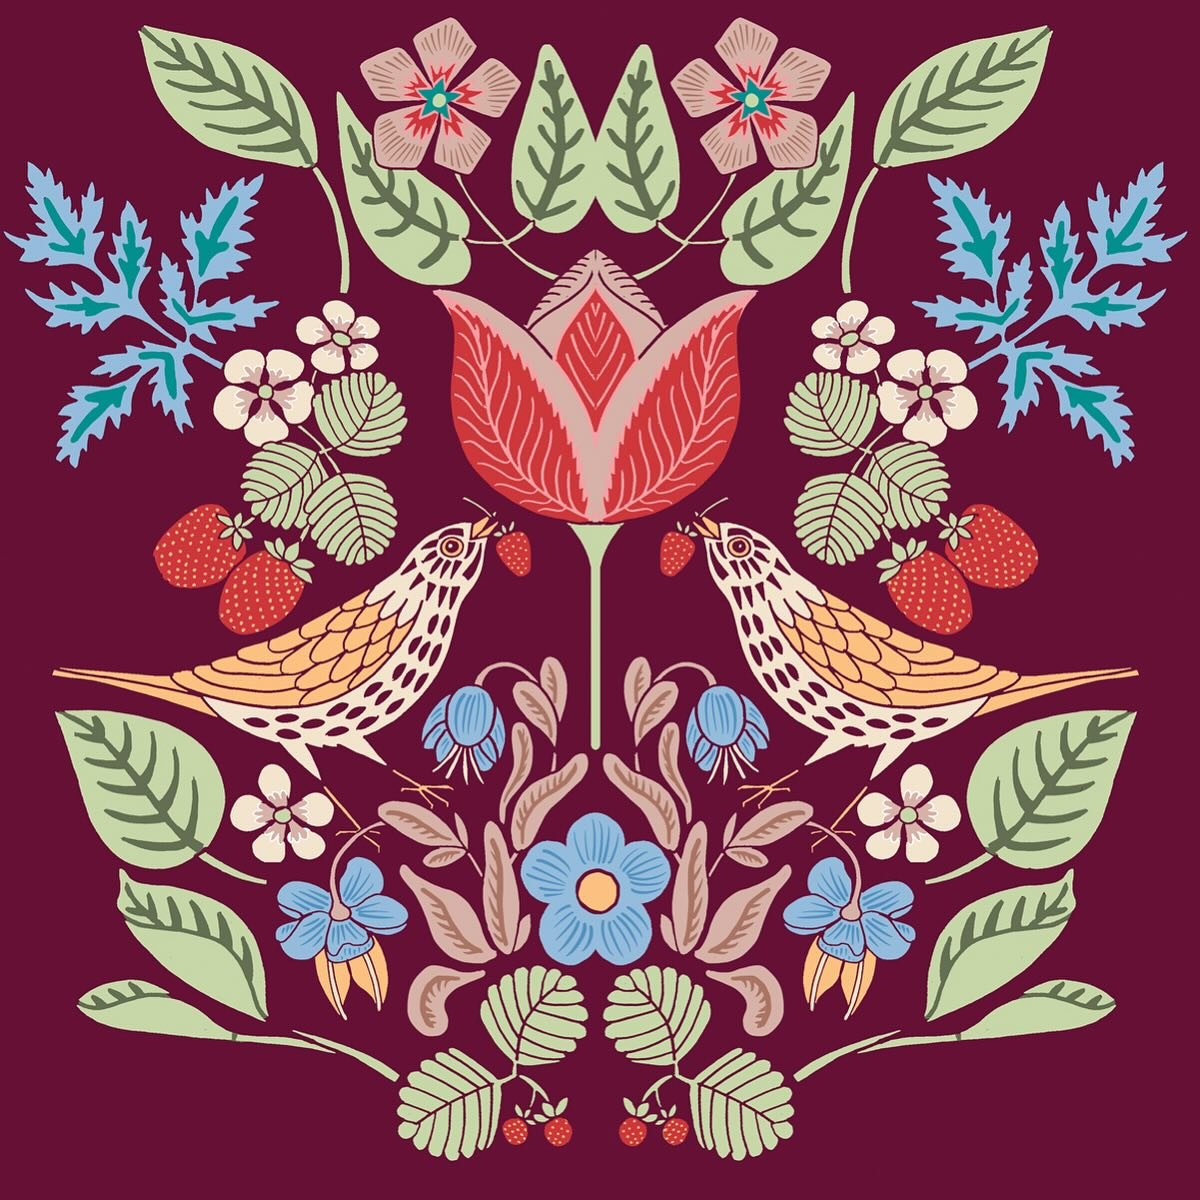 This week the prompt for @jehane_ltd Golden Thread design challenge is William Morris&rsquo;s iconic design The Strawberry Thief. Here is my interpretation based on a bunch of flowers from garden (and of-course some strawberries! ) created for the He